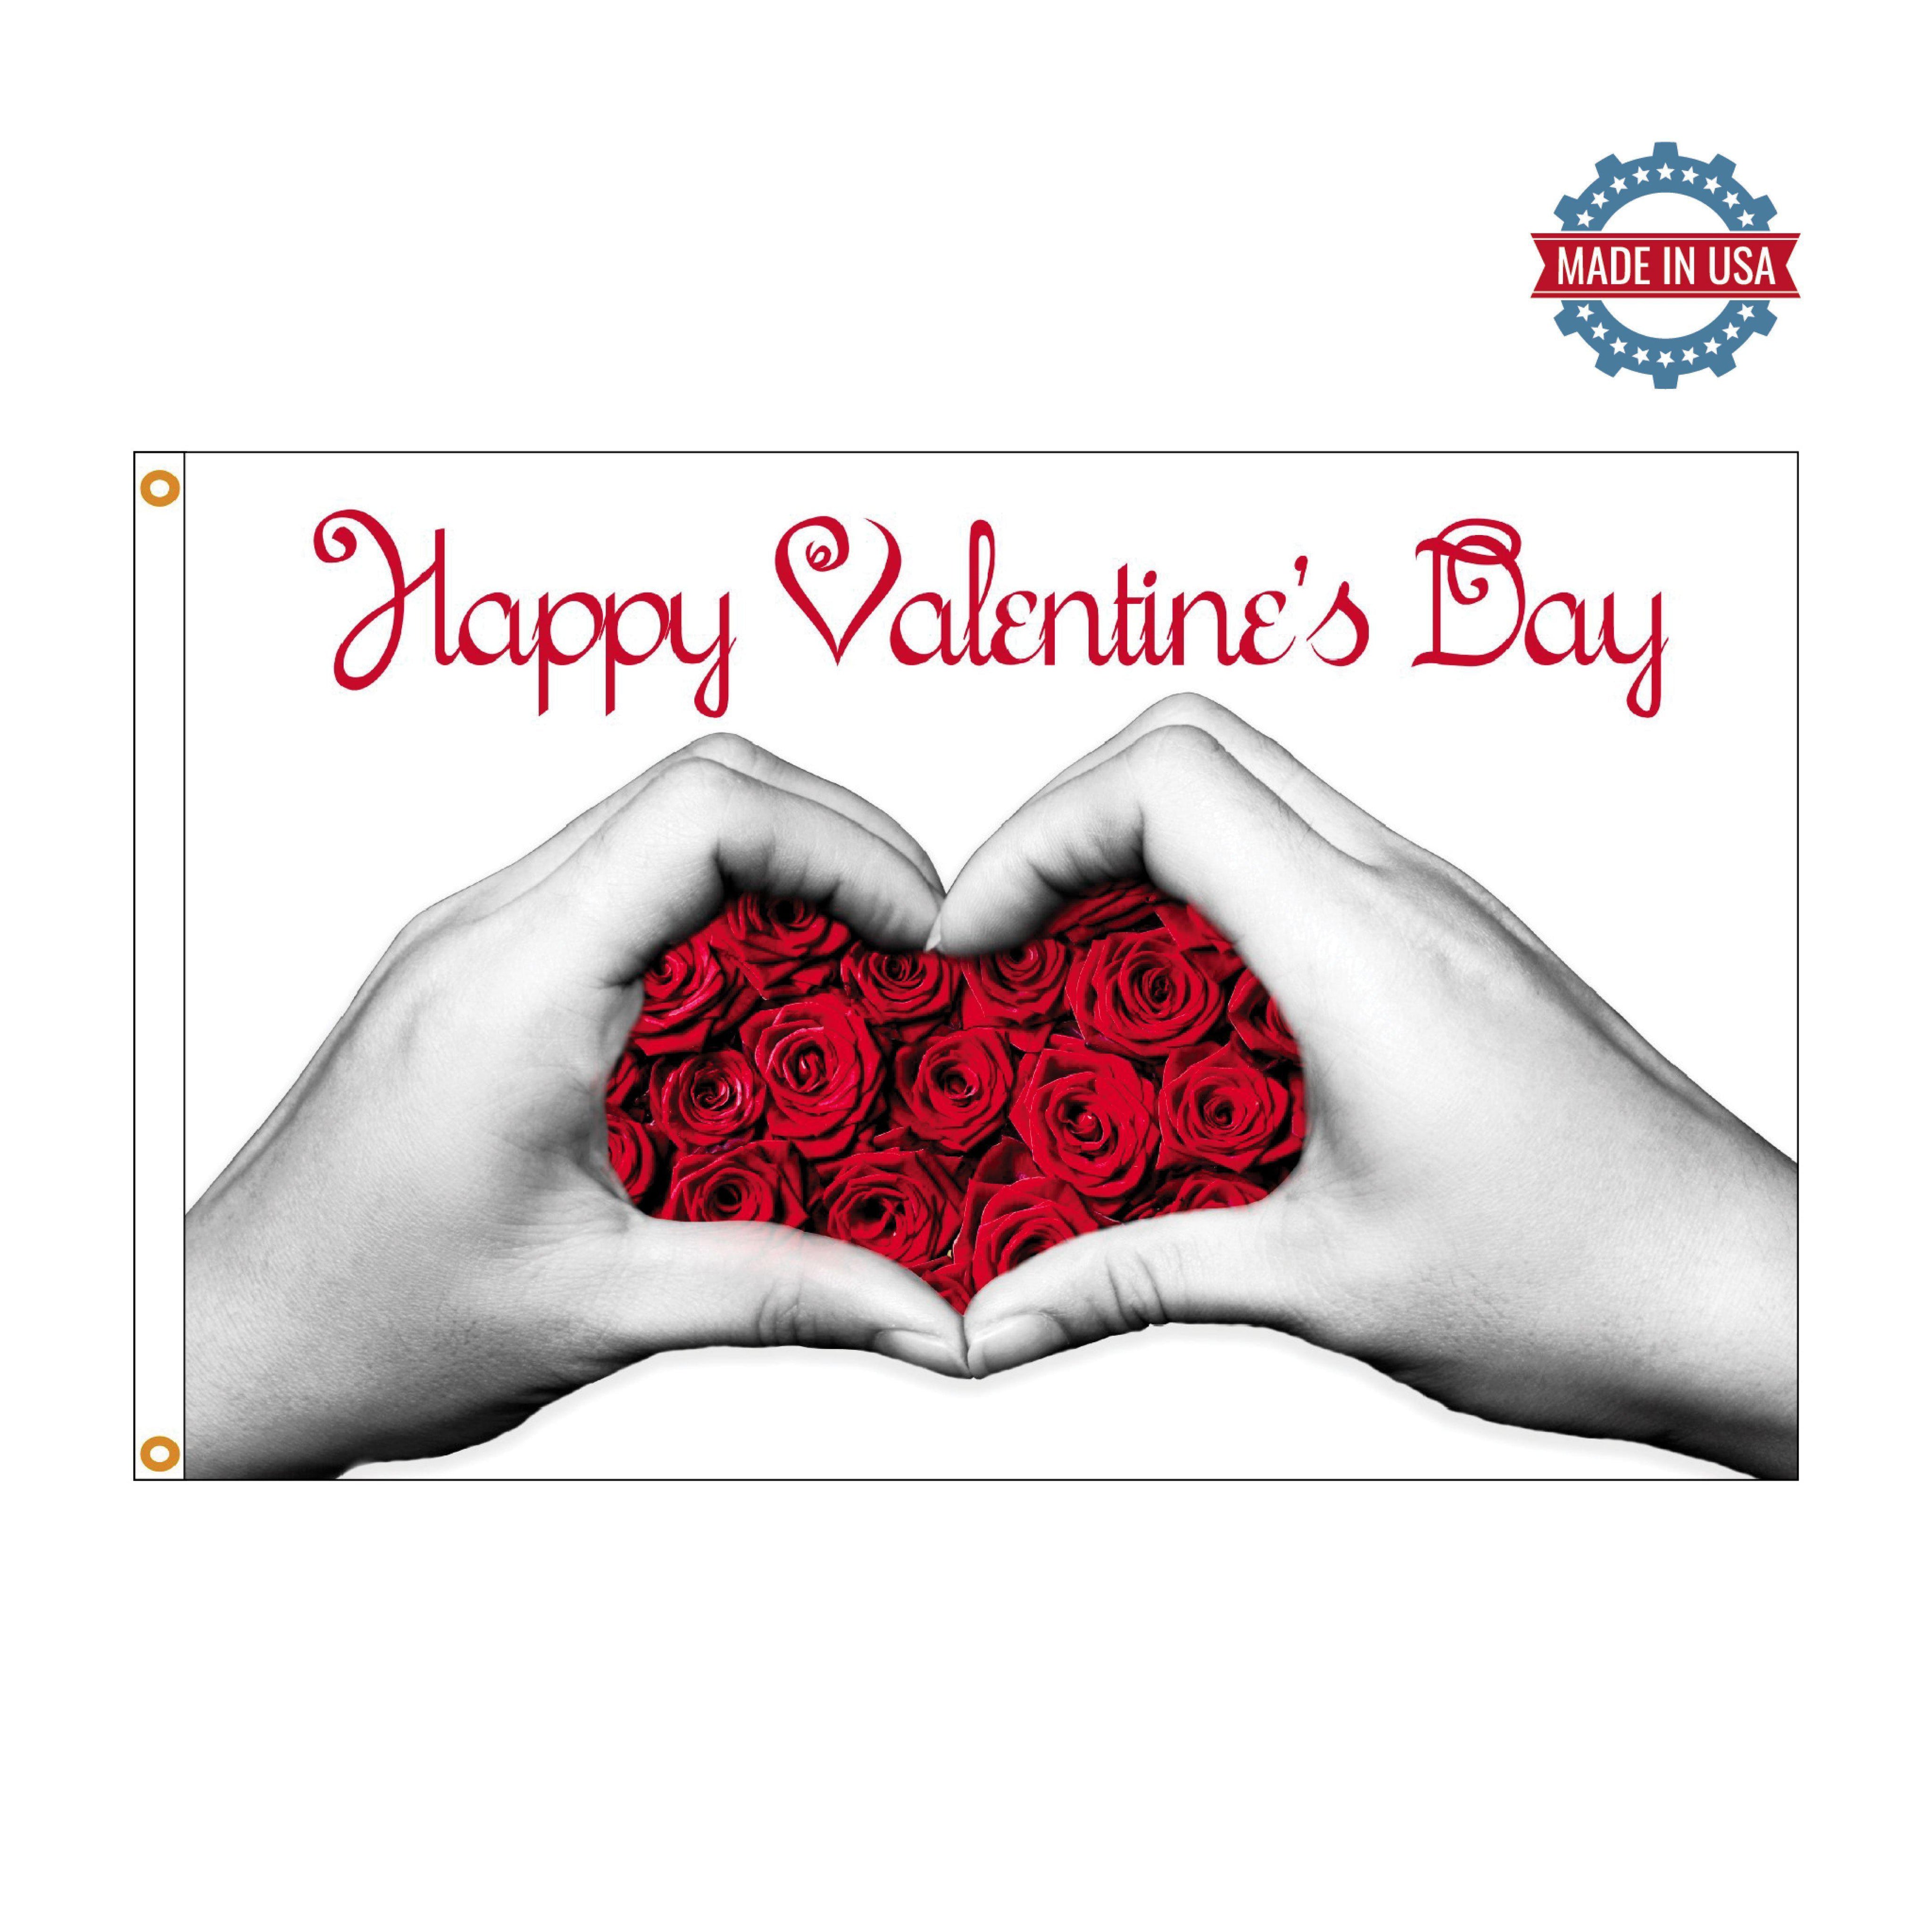 The Valentine Hands 3' x 5' flag features red roses inside heart hands and a "Happy Valentine's Day" message.